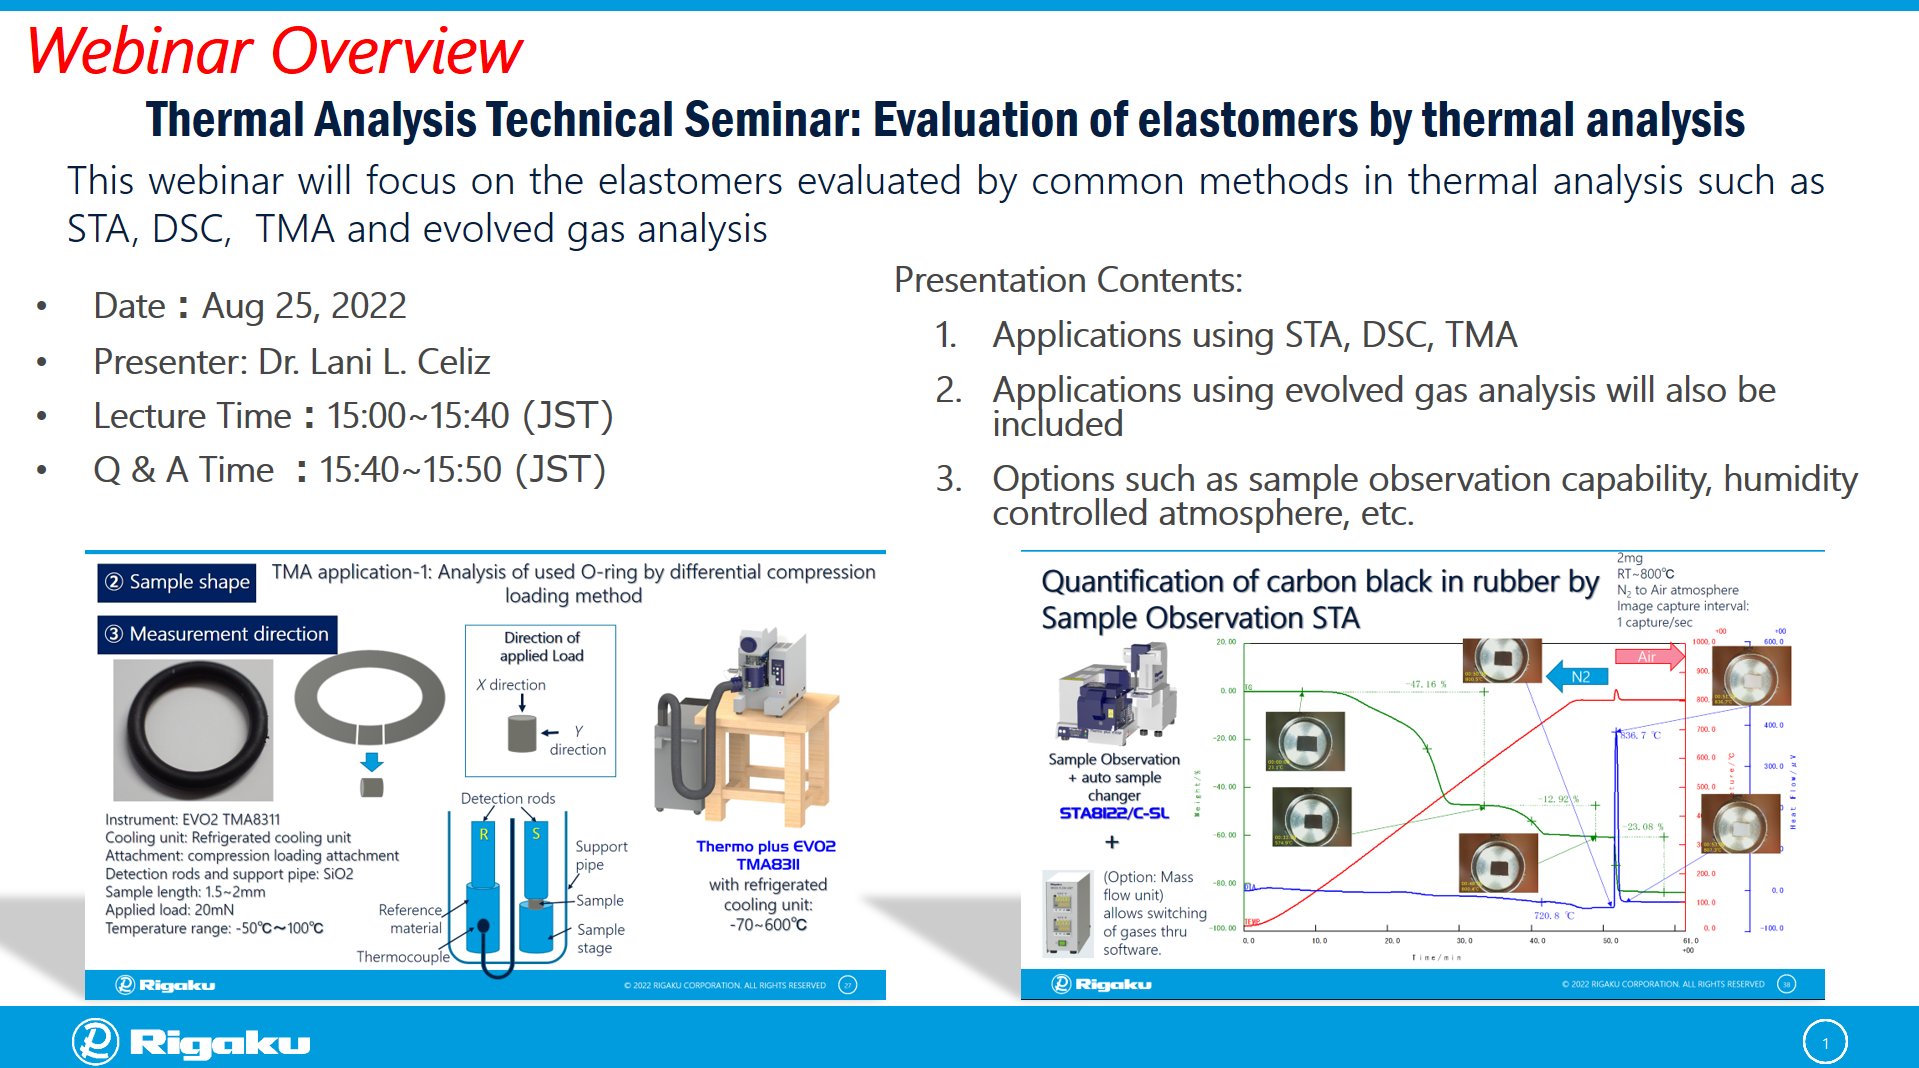 Evaluation of elastomers by thermal analysis